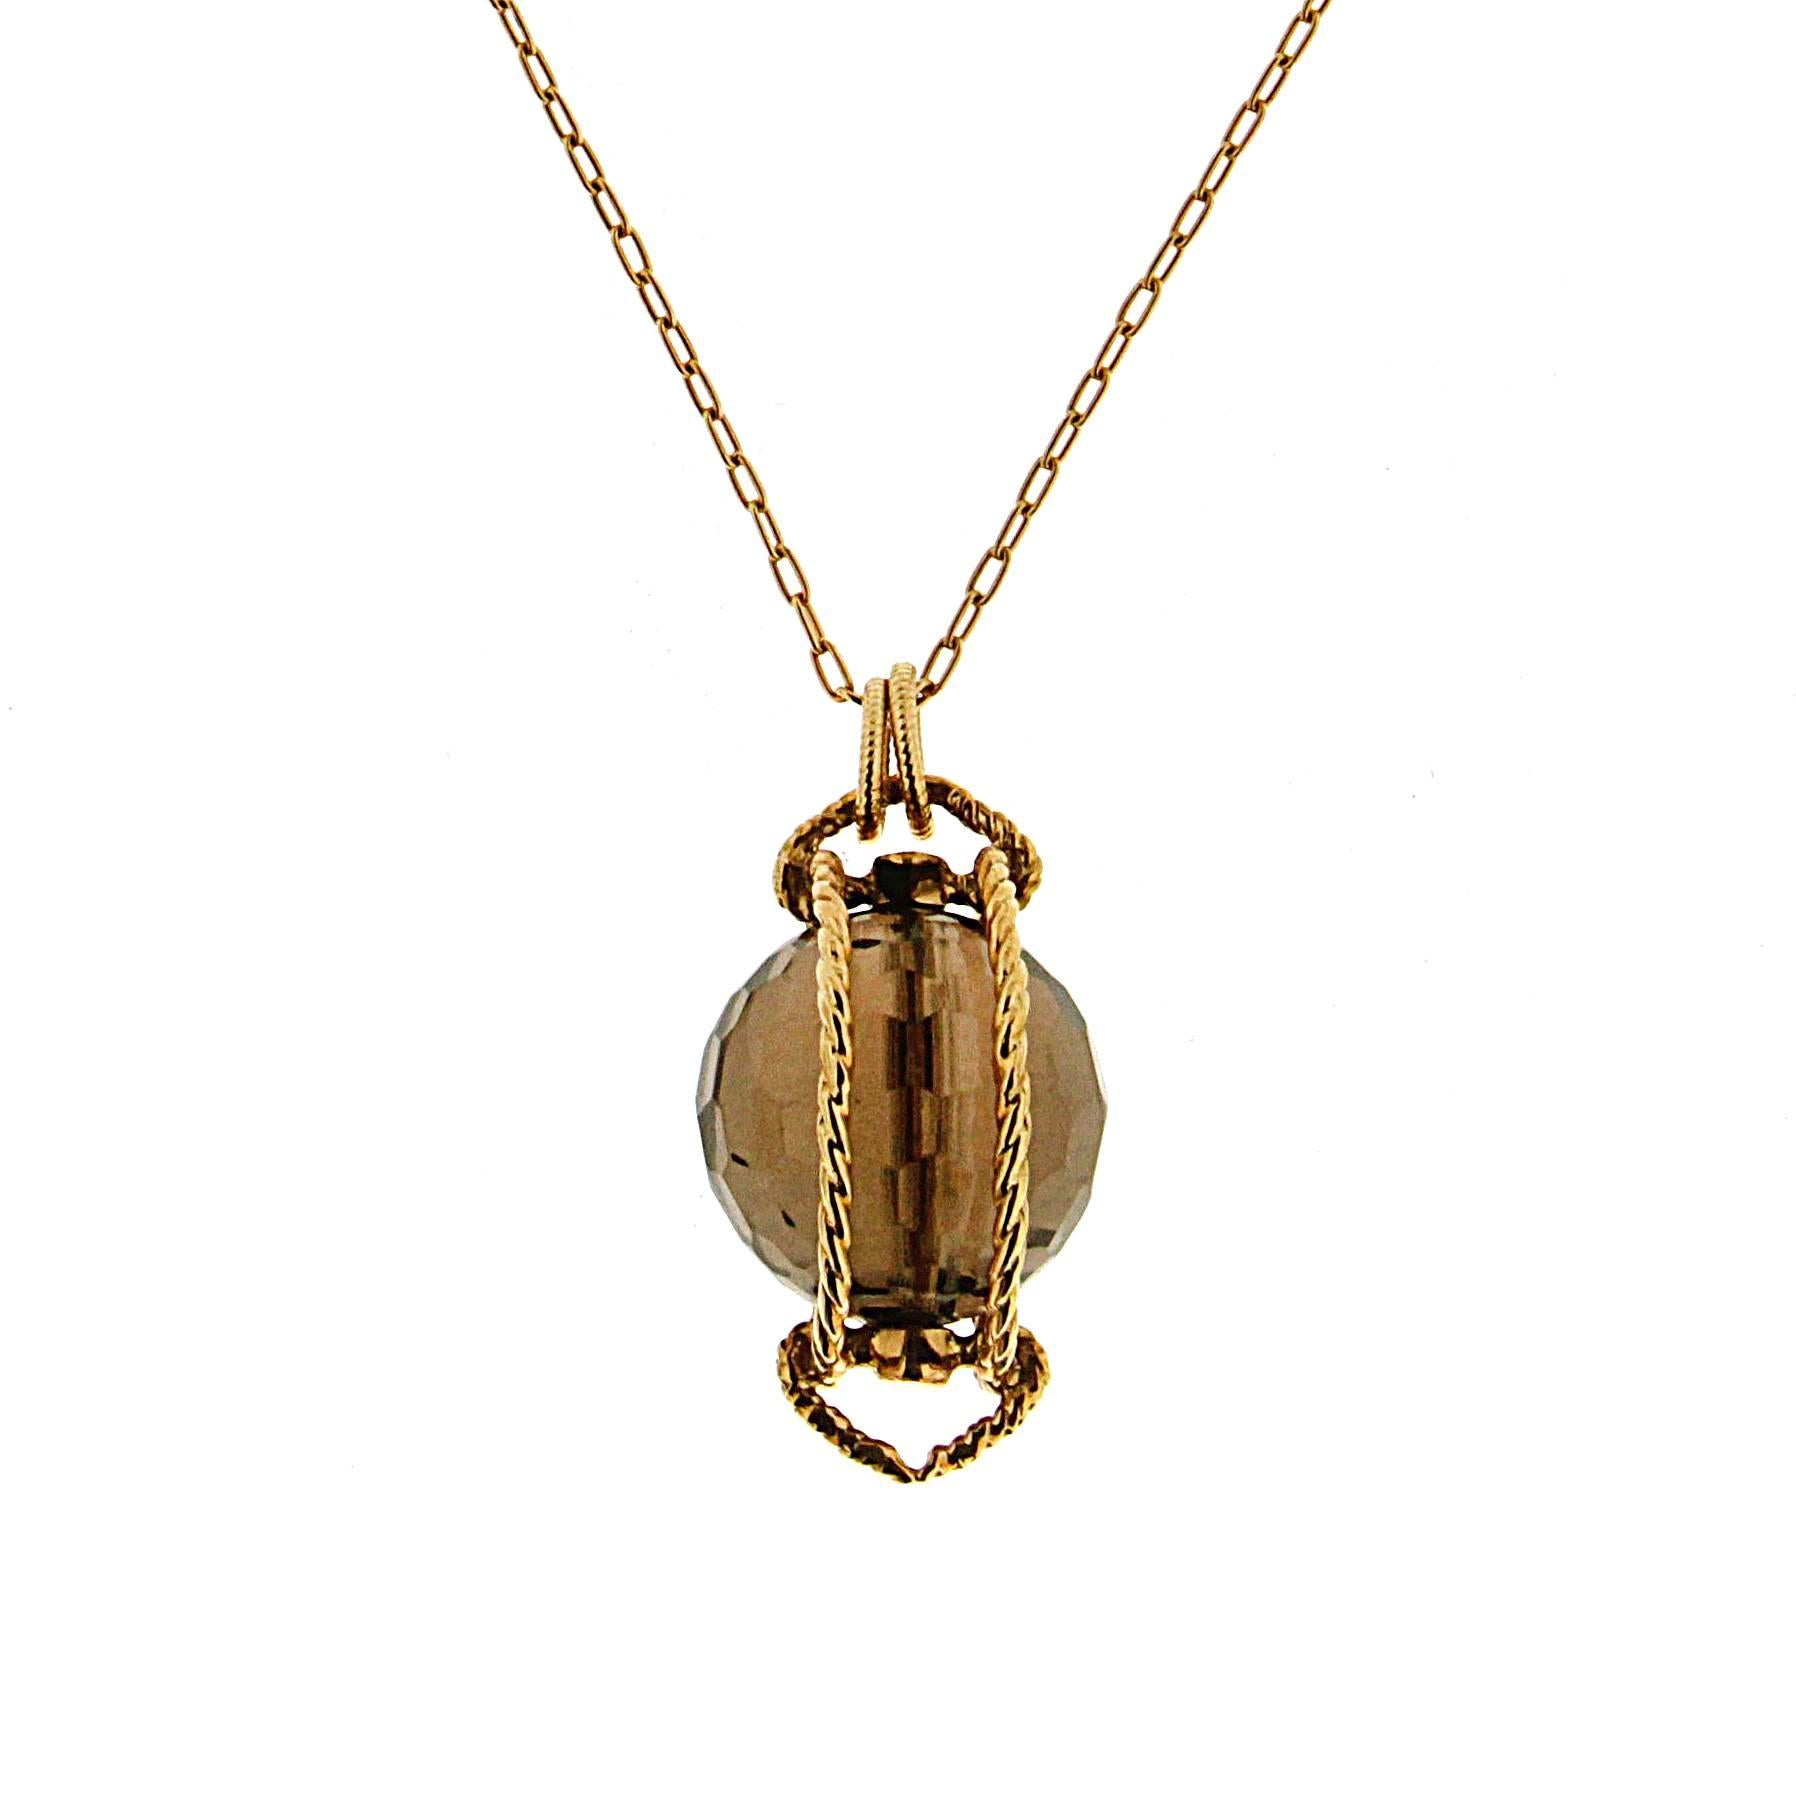 This classic Doppio Rope Pendant features a 12 mm faceted Smokey Topaz  ball with an 18 inches 18kt yellow gold chain.
